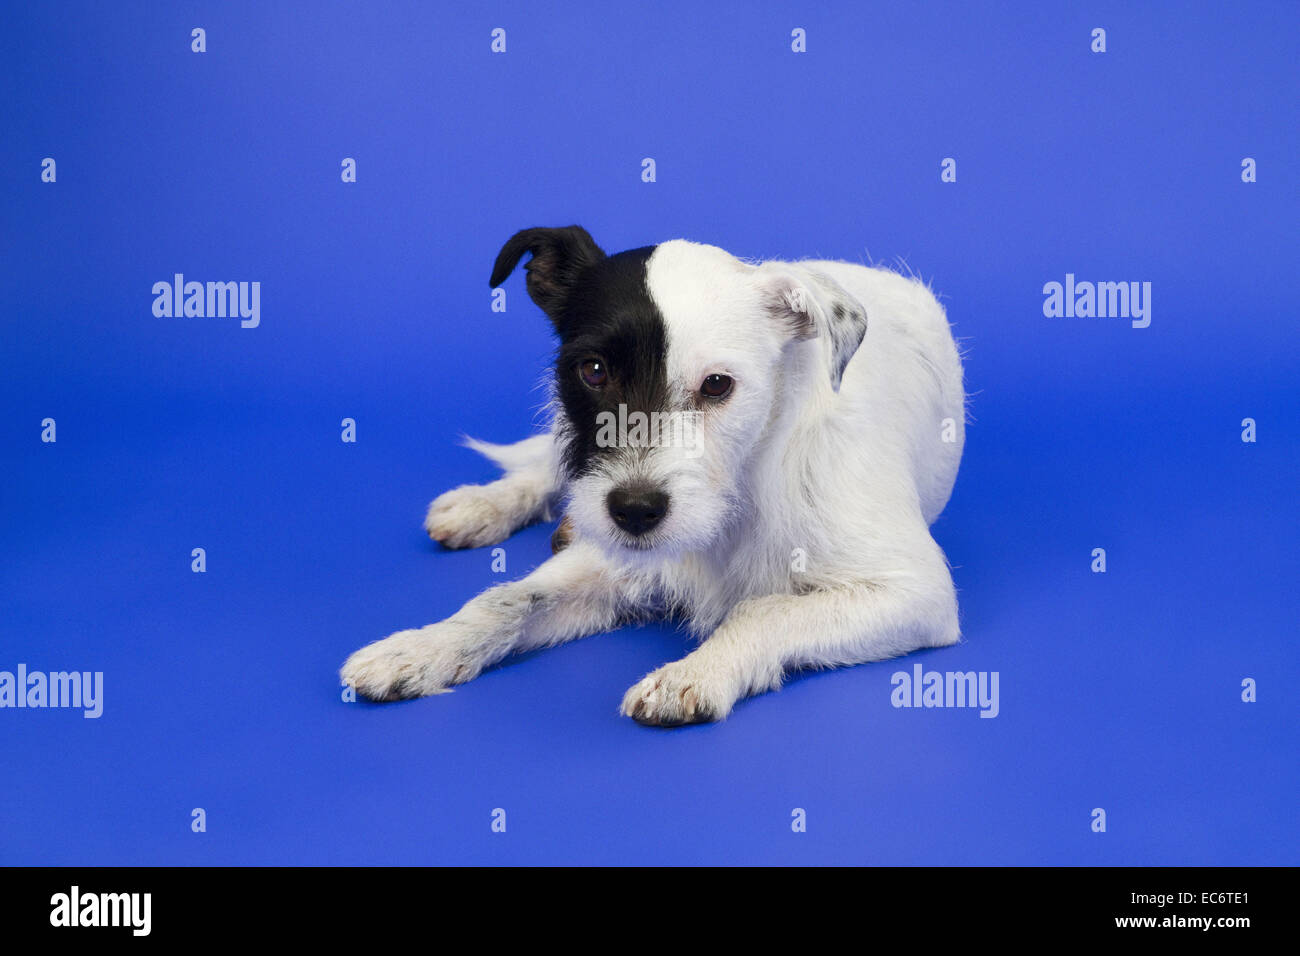 Black and white Parson Russell Terrier Stock Photo